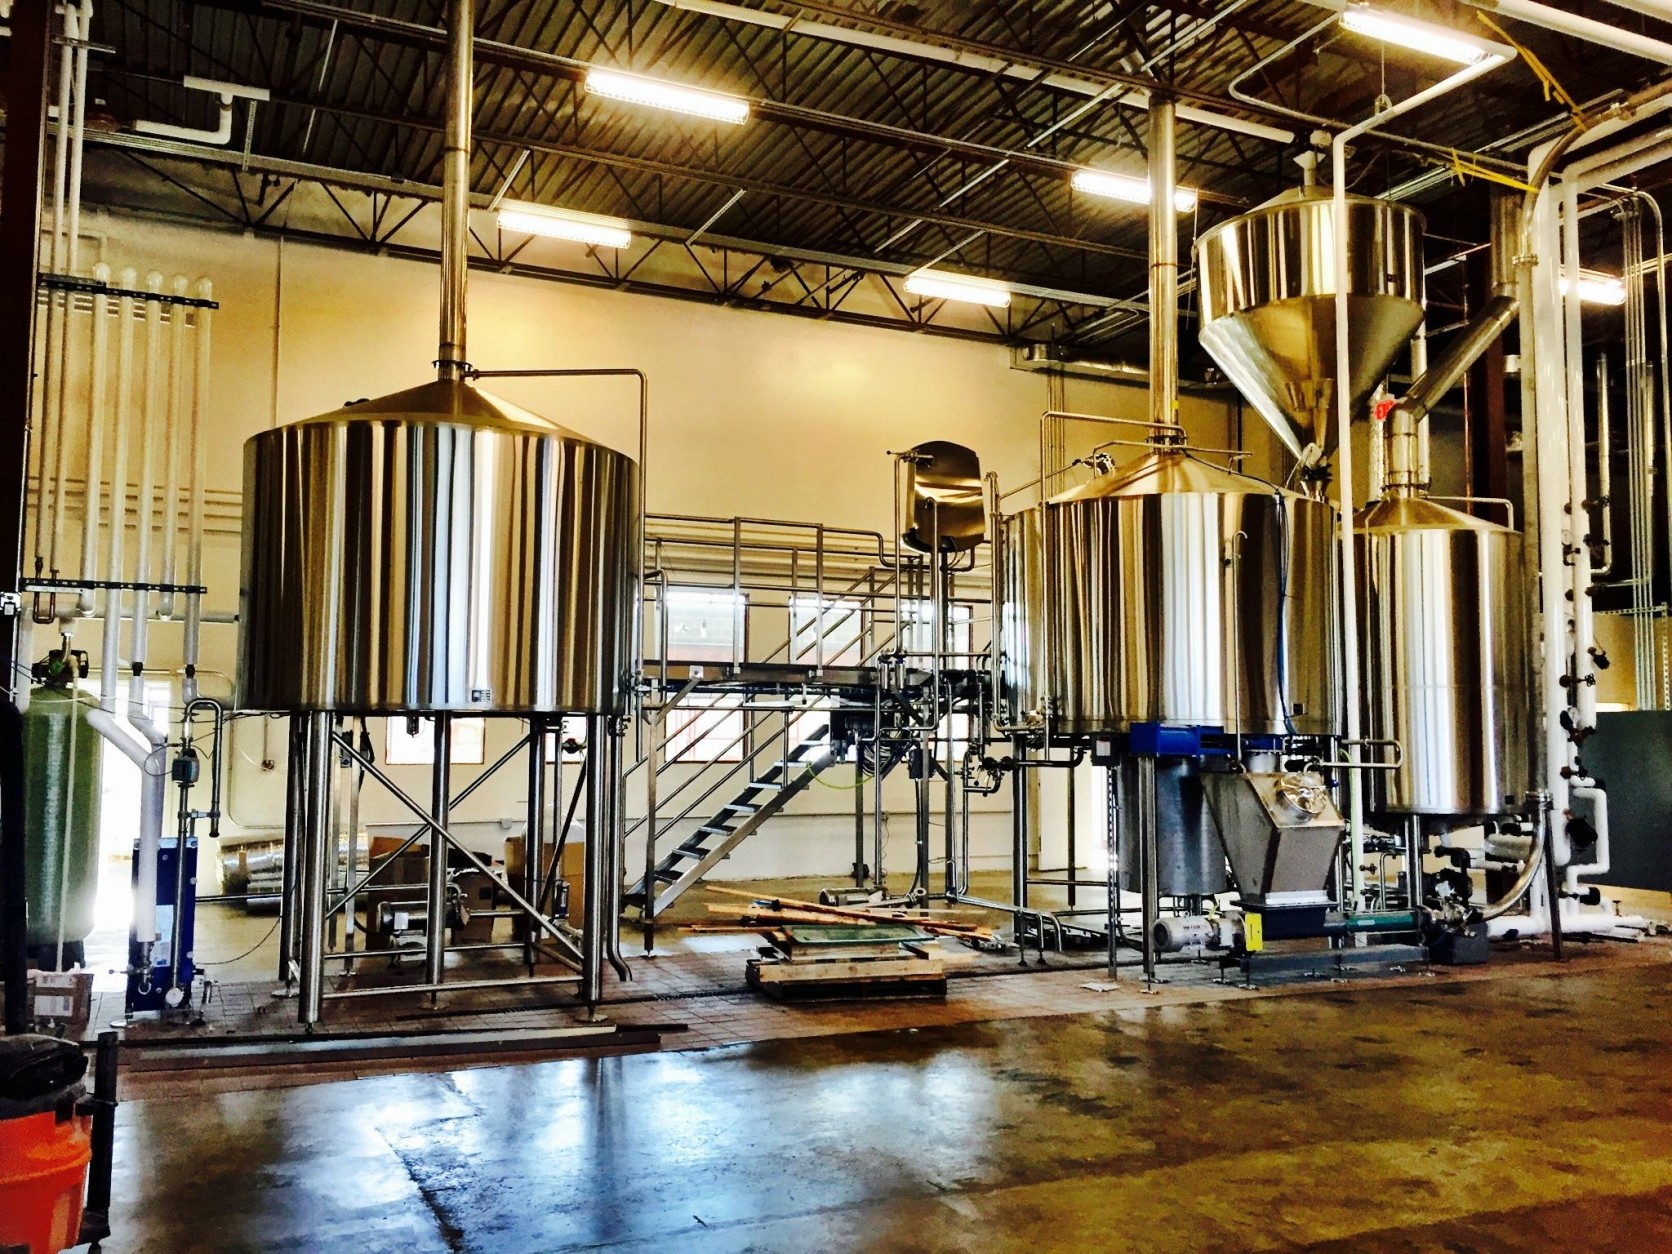 Mustang Sally Brewing Co. will start with four craft brews: a Kölsch,  a West Coast IPA, a porter and an amber lager. (Courtesy Sean Hunt)